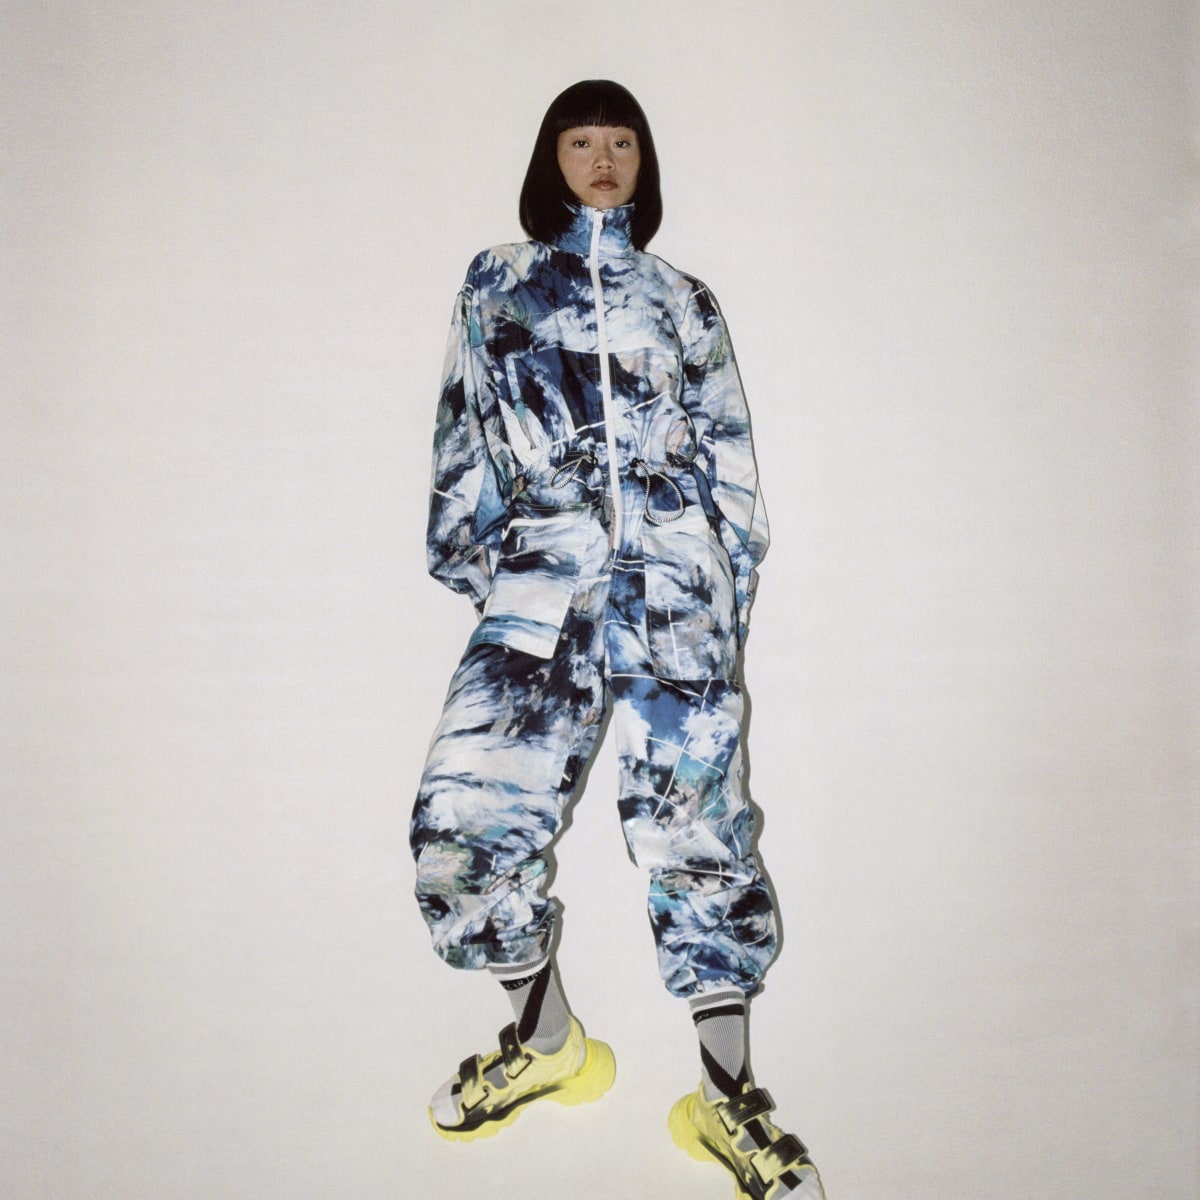 Adidas by Stella McCartney TrueCasuals All-in-One Overall. 7